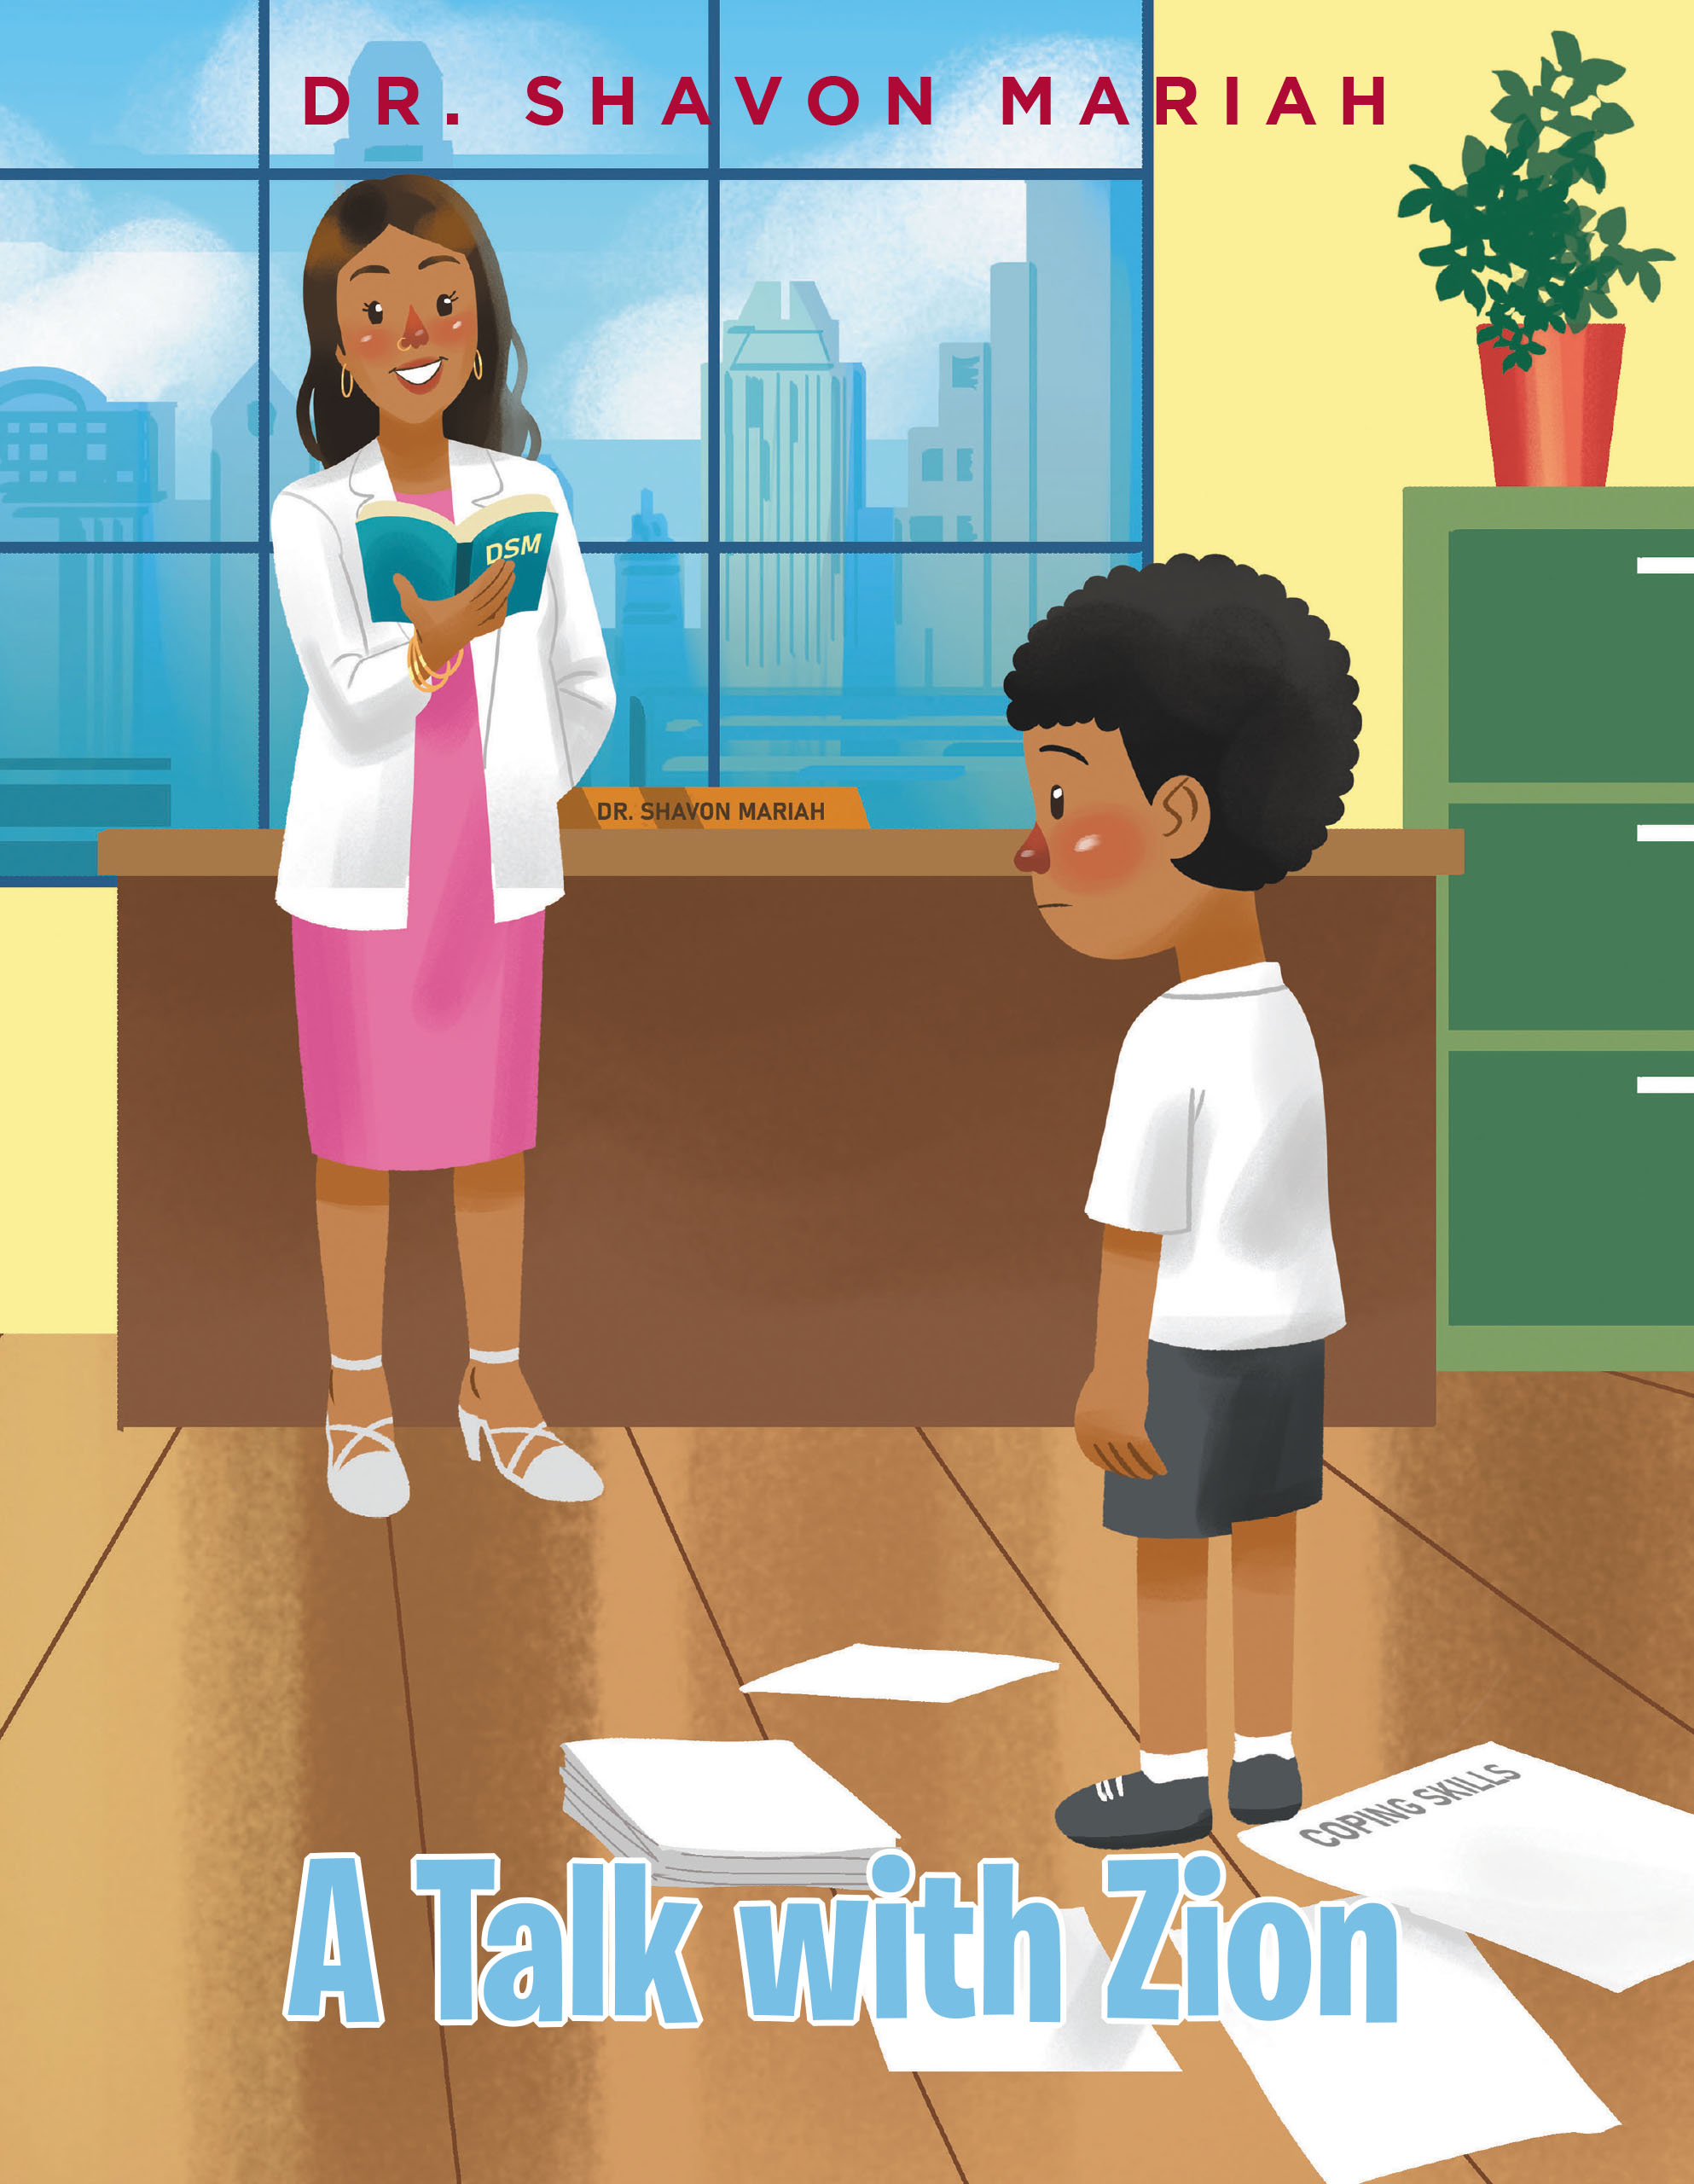 Dr. Shavon Mariah’s New Book, "A Talk with Zion," Follows a Young Boy Named Zion as He Talks with a Therapist About Depression and How to Best Manage It